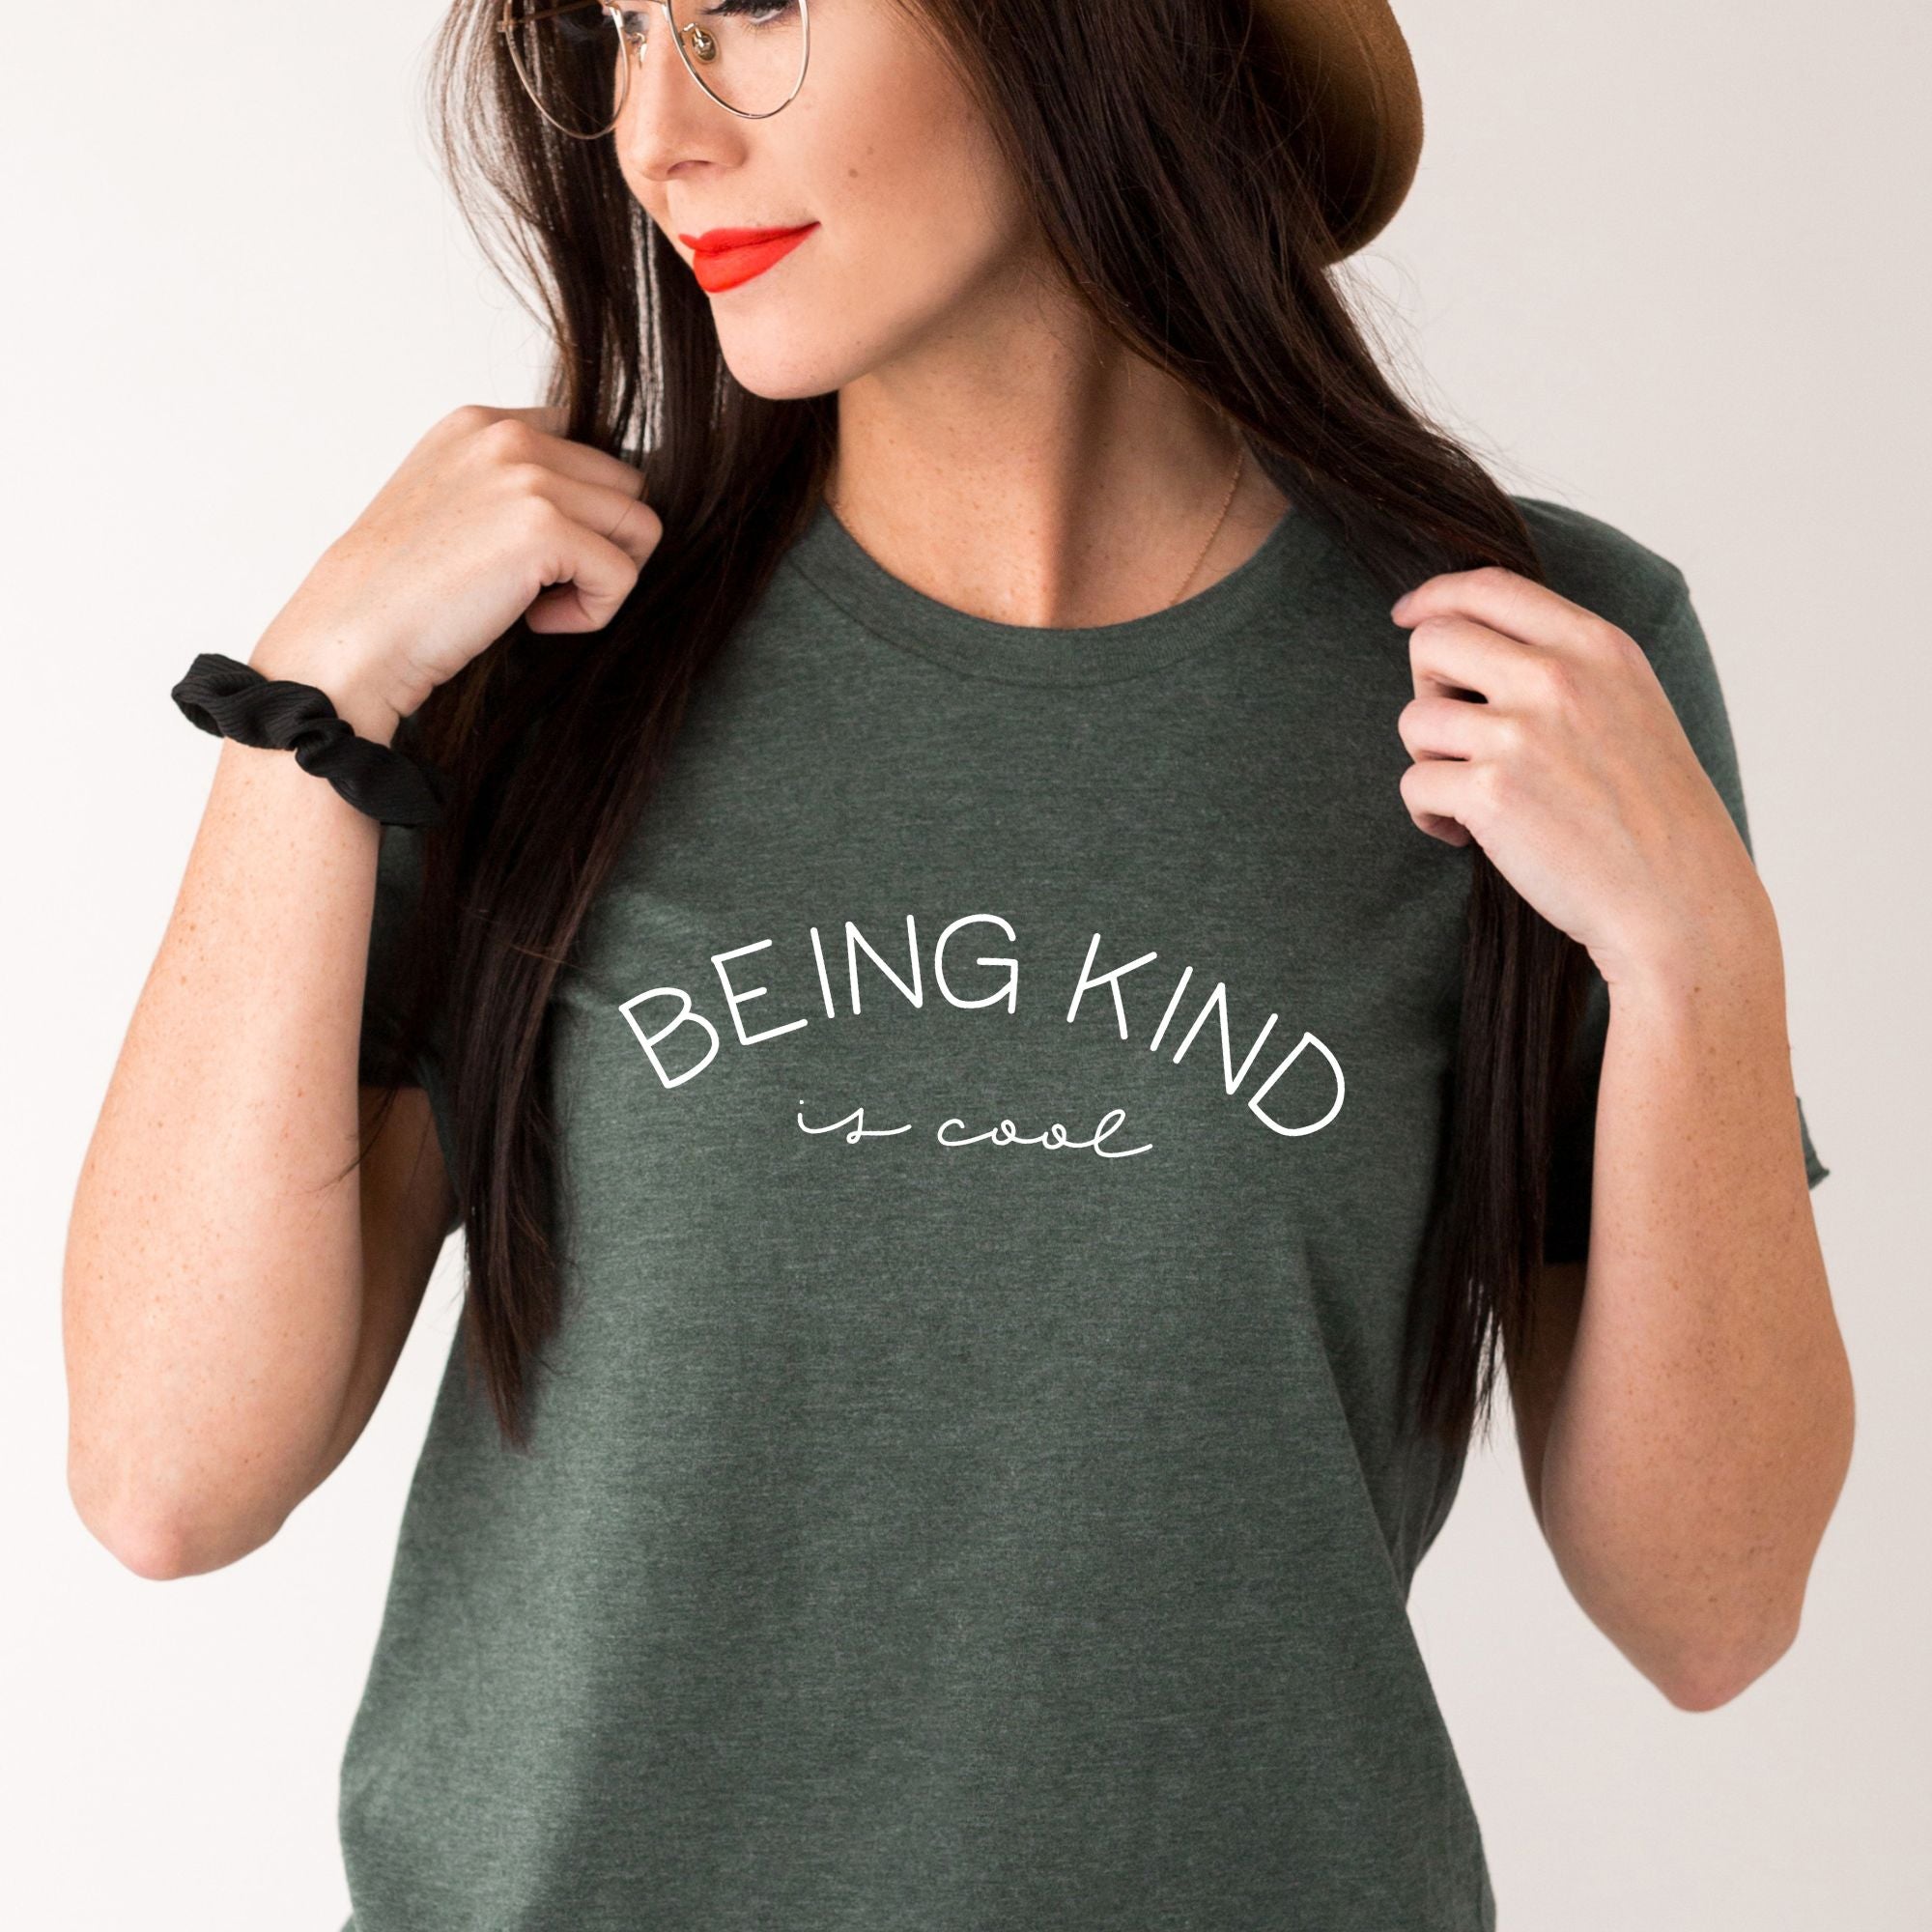 Kind Is Cool TShirt for Women *UNISEX FIT*-208 Tees Wholesale, Idaho